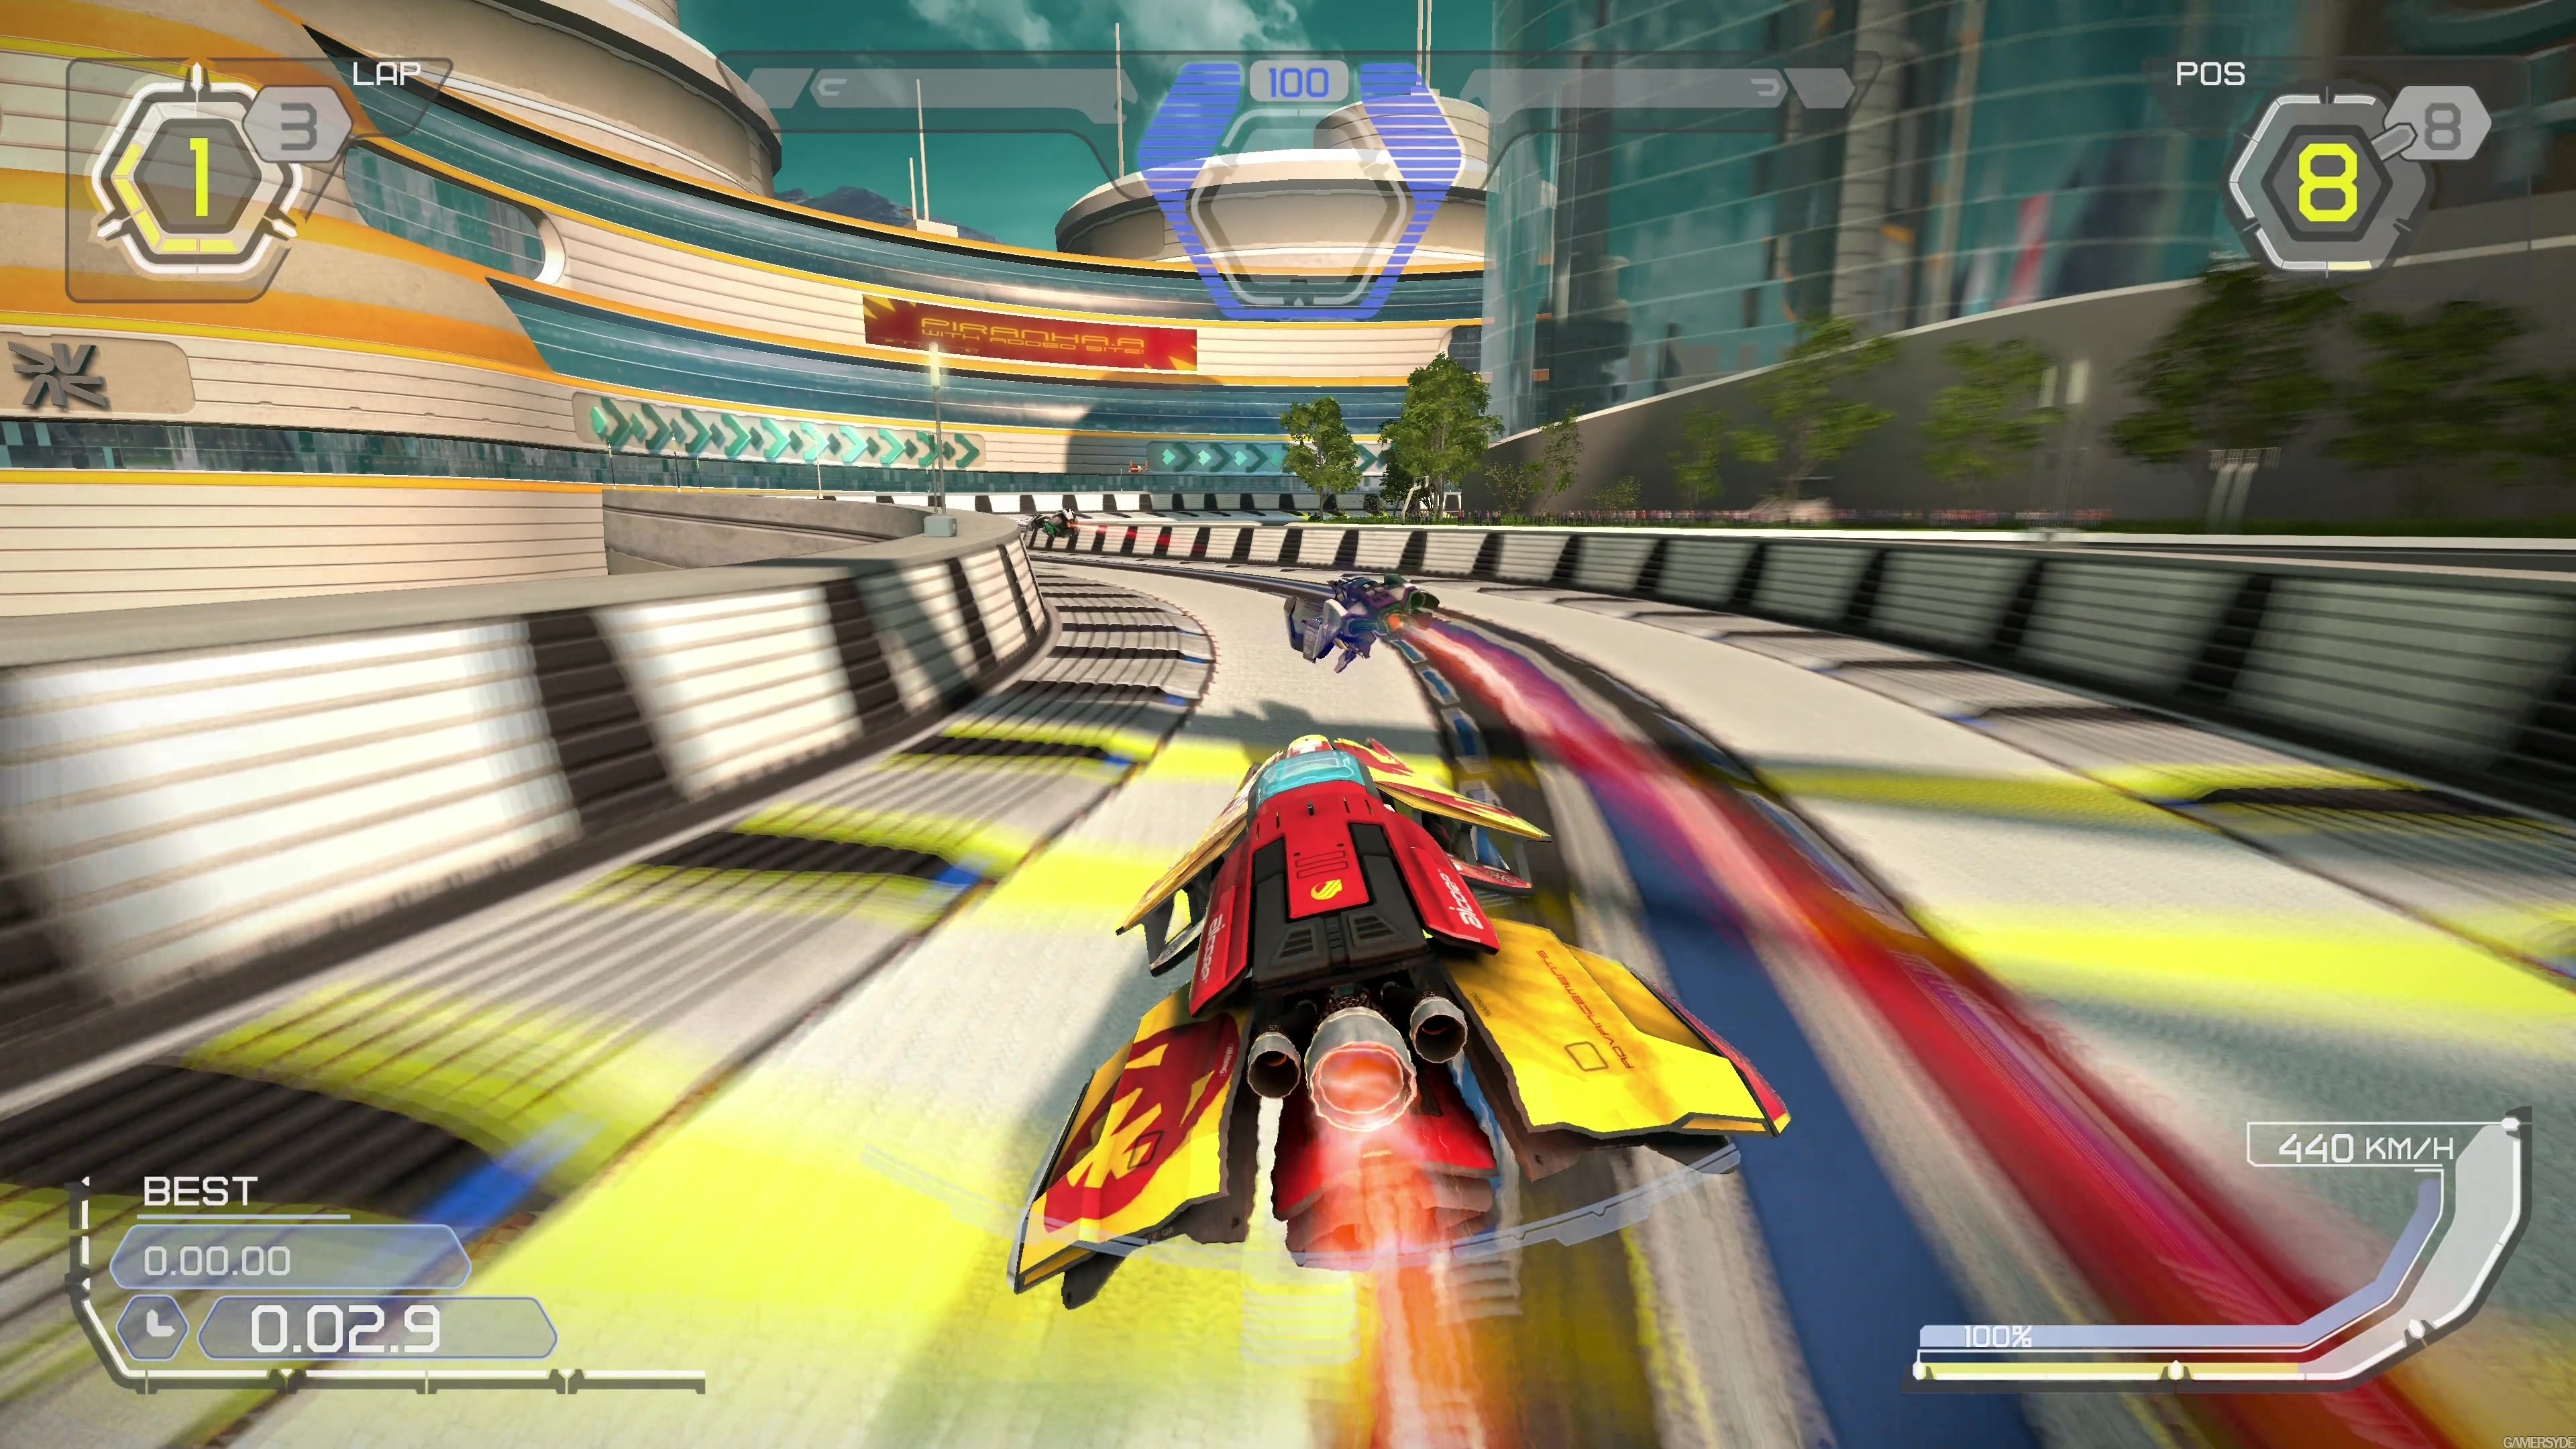 WipEout Omega Collection - Wipeout HD - Gameplay #2 (4K) - quality stream and download - Gamersyde